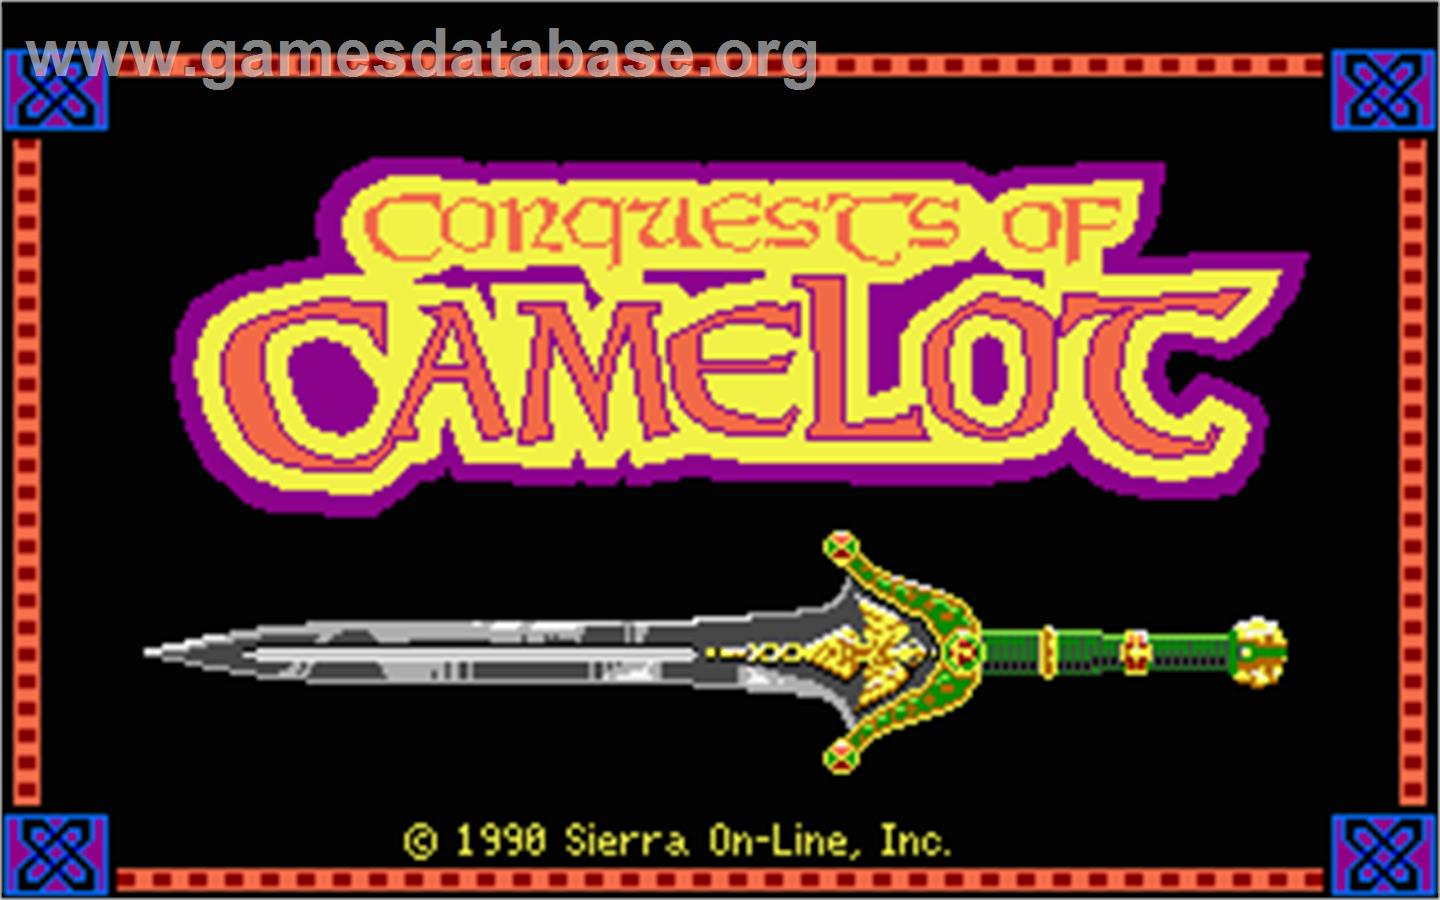 Conquests of Camelot: The Search for the Grail - Atari ST - Artwork - Title Screen